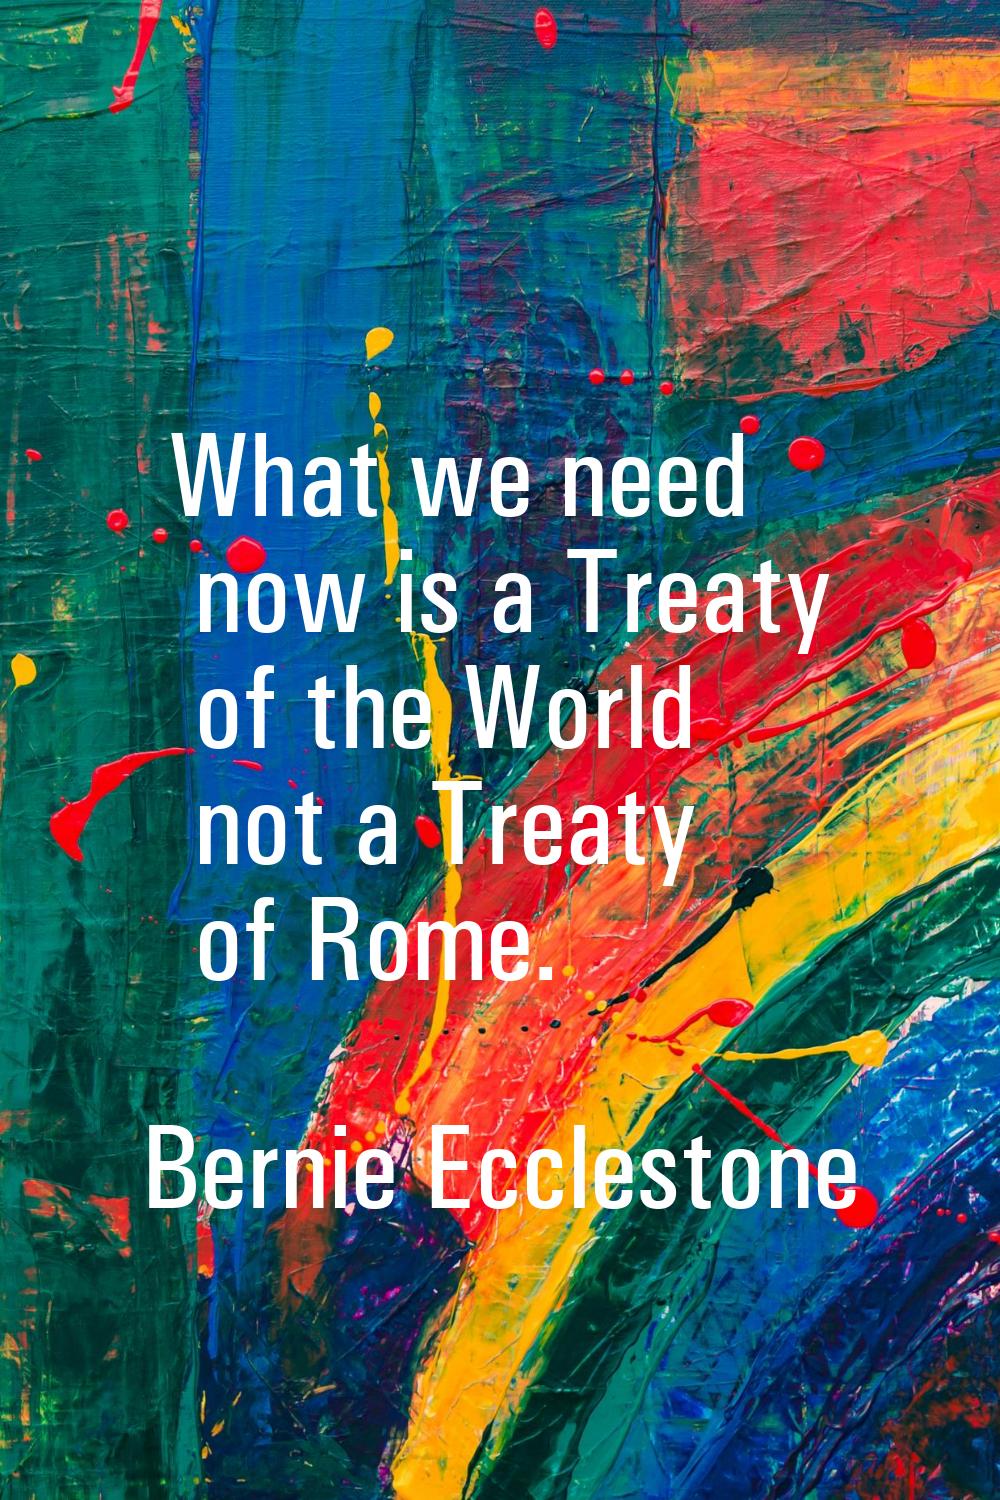 What we need now is a Treaty of the World not a Treaty of Rome.